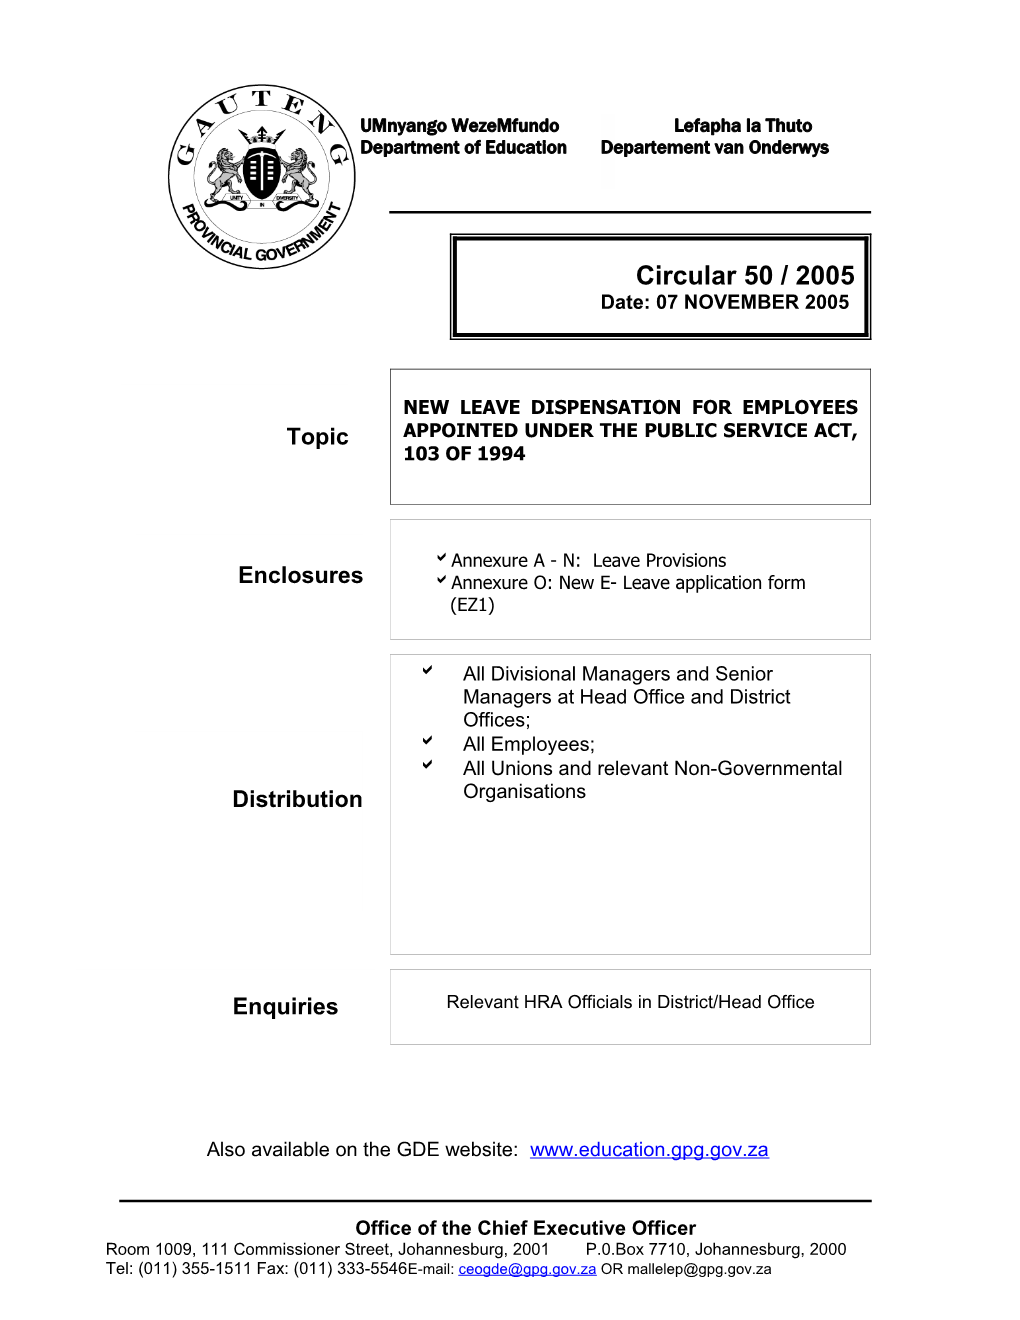 Circular 50 of 2005 NEW LEAVE DISPENSATION for EMPLOYEES APPOINTED UNDER the PUBLIC SERVICE